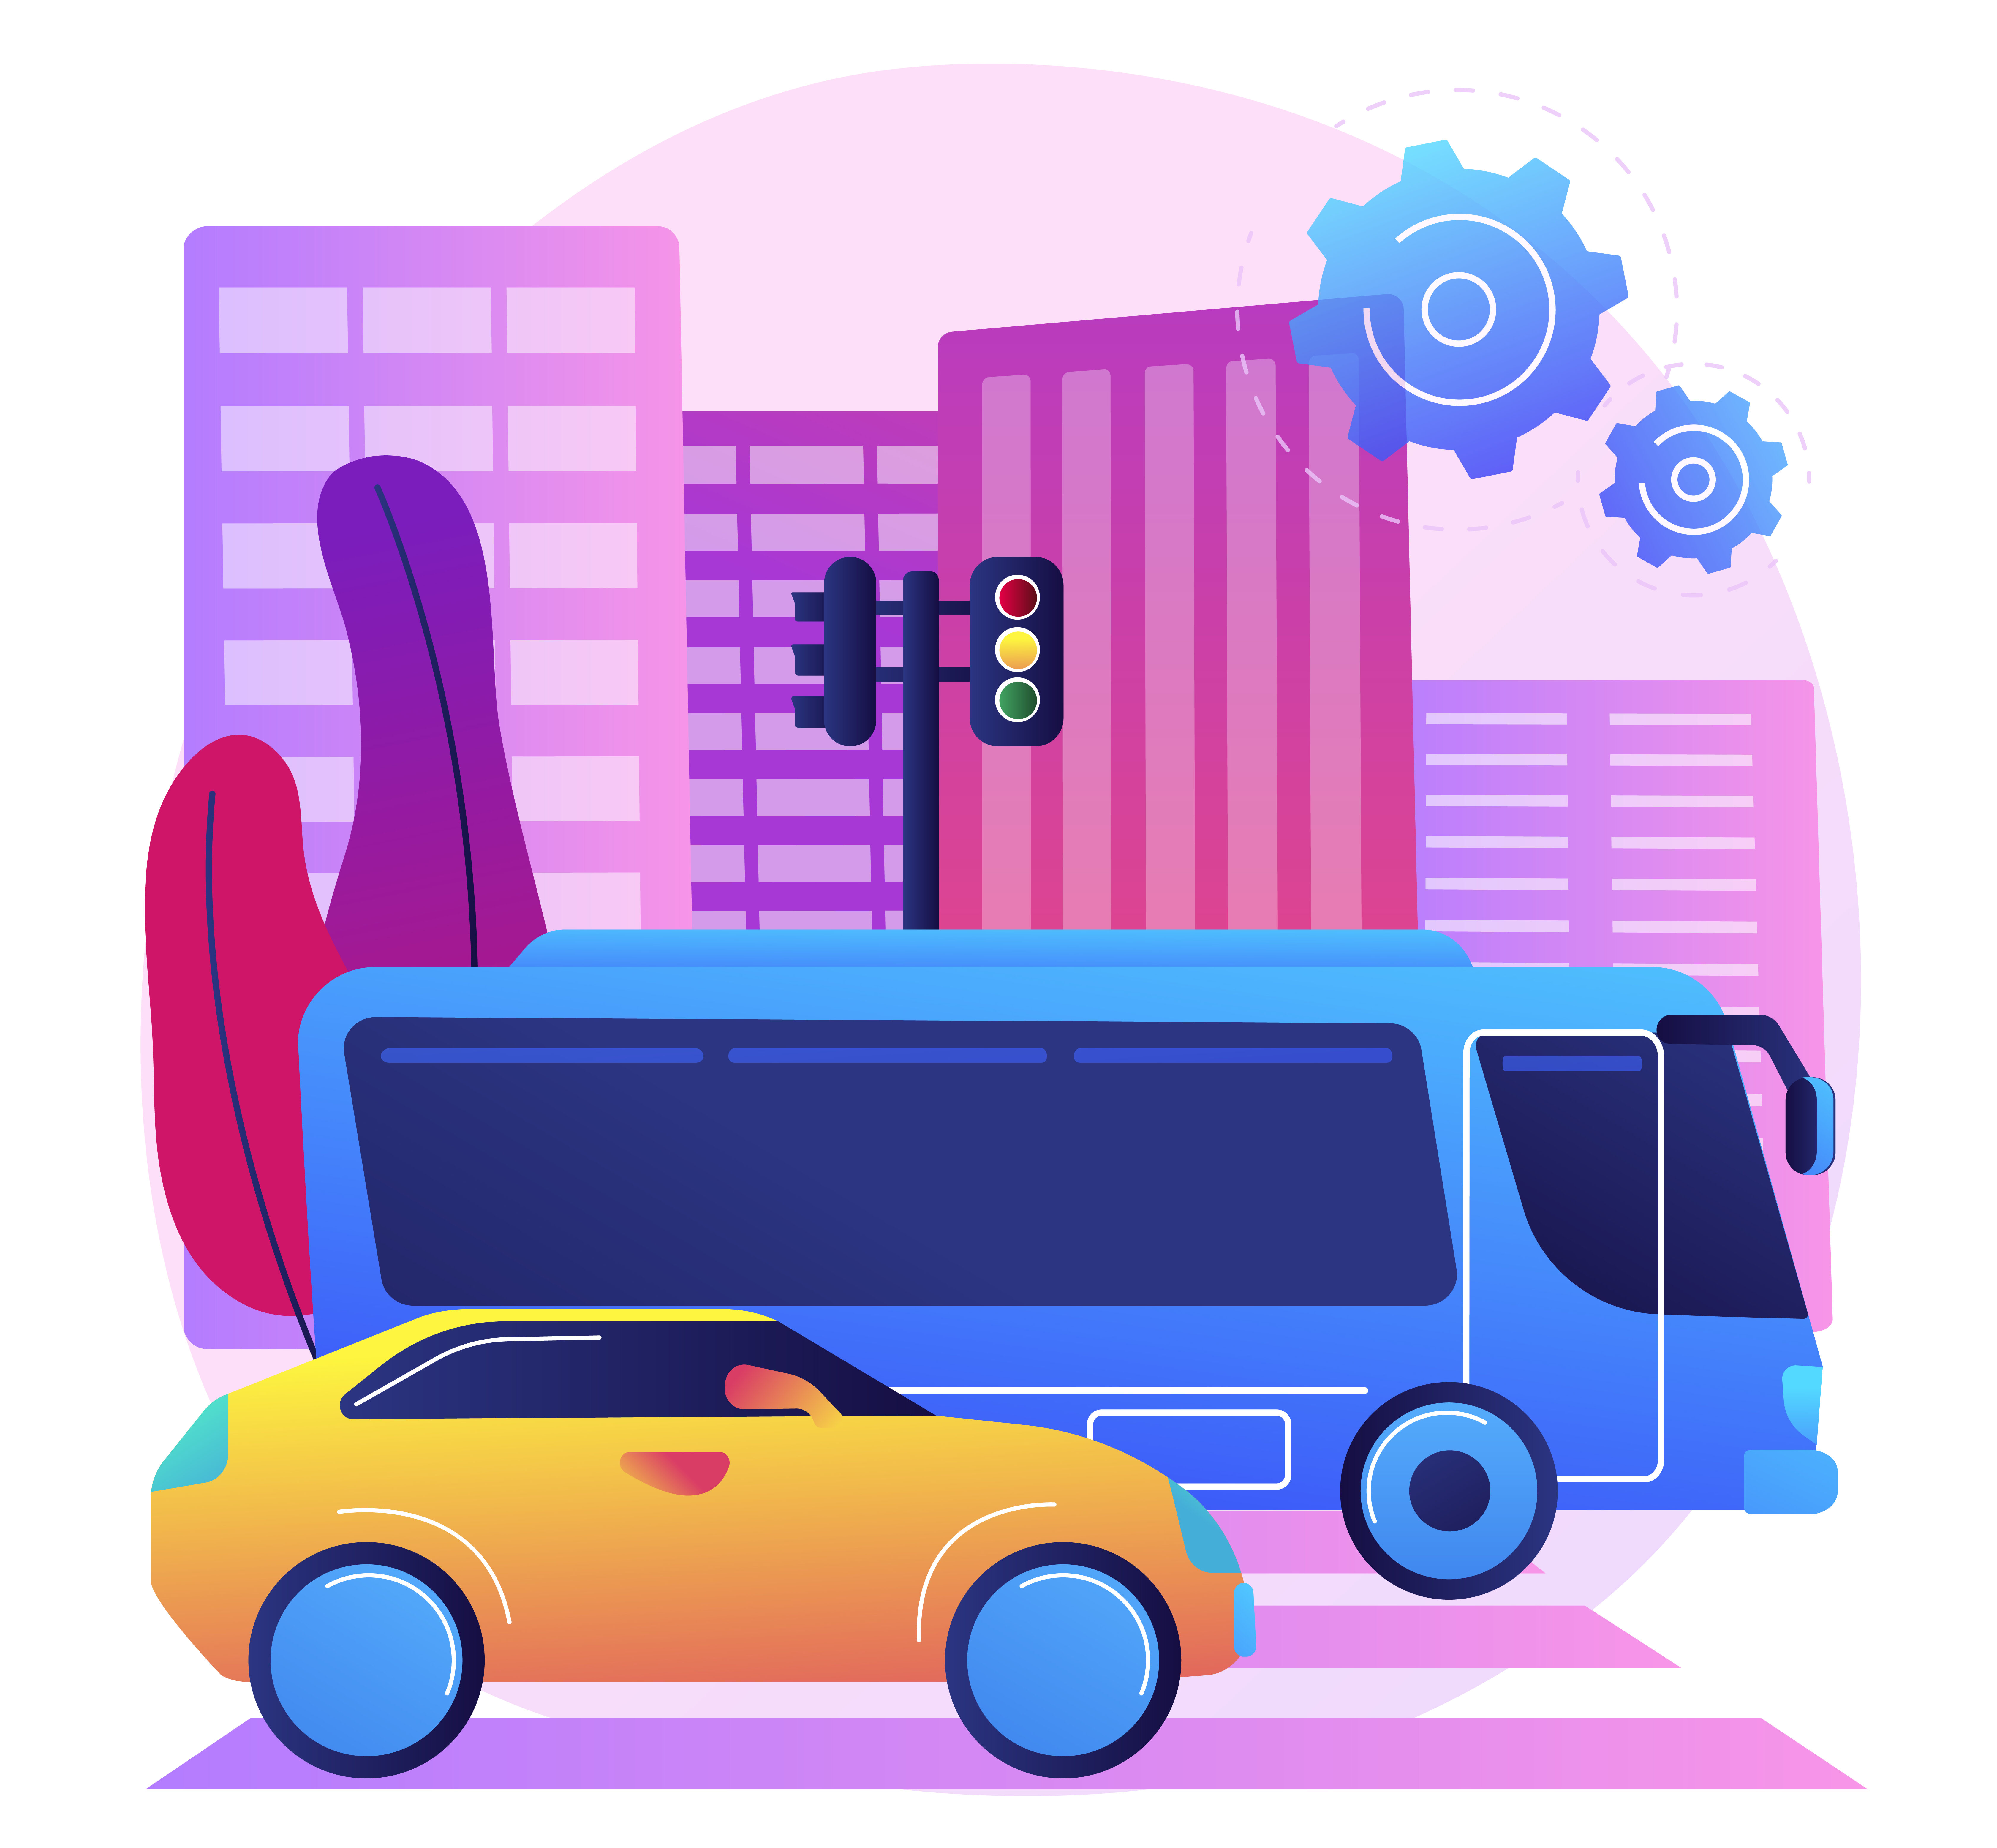 Surface transport abstract concept vector illustration. Road transport, movement of goods people, road or rail, truck on highway, roundabout traffic, car driving fast, bus stop abstract metaphor.